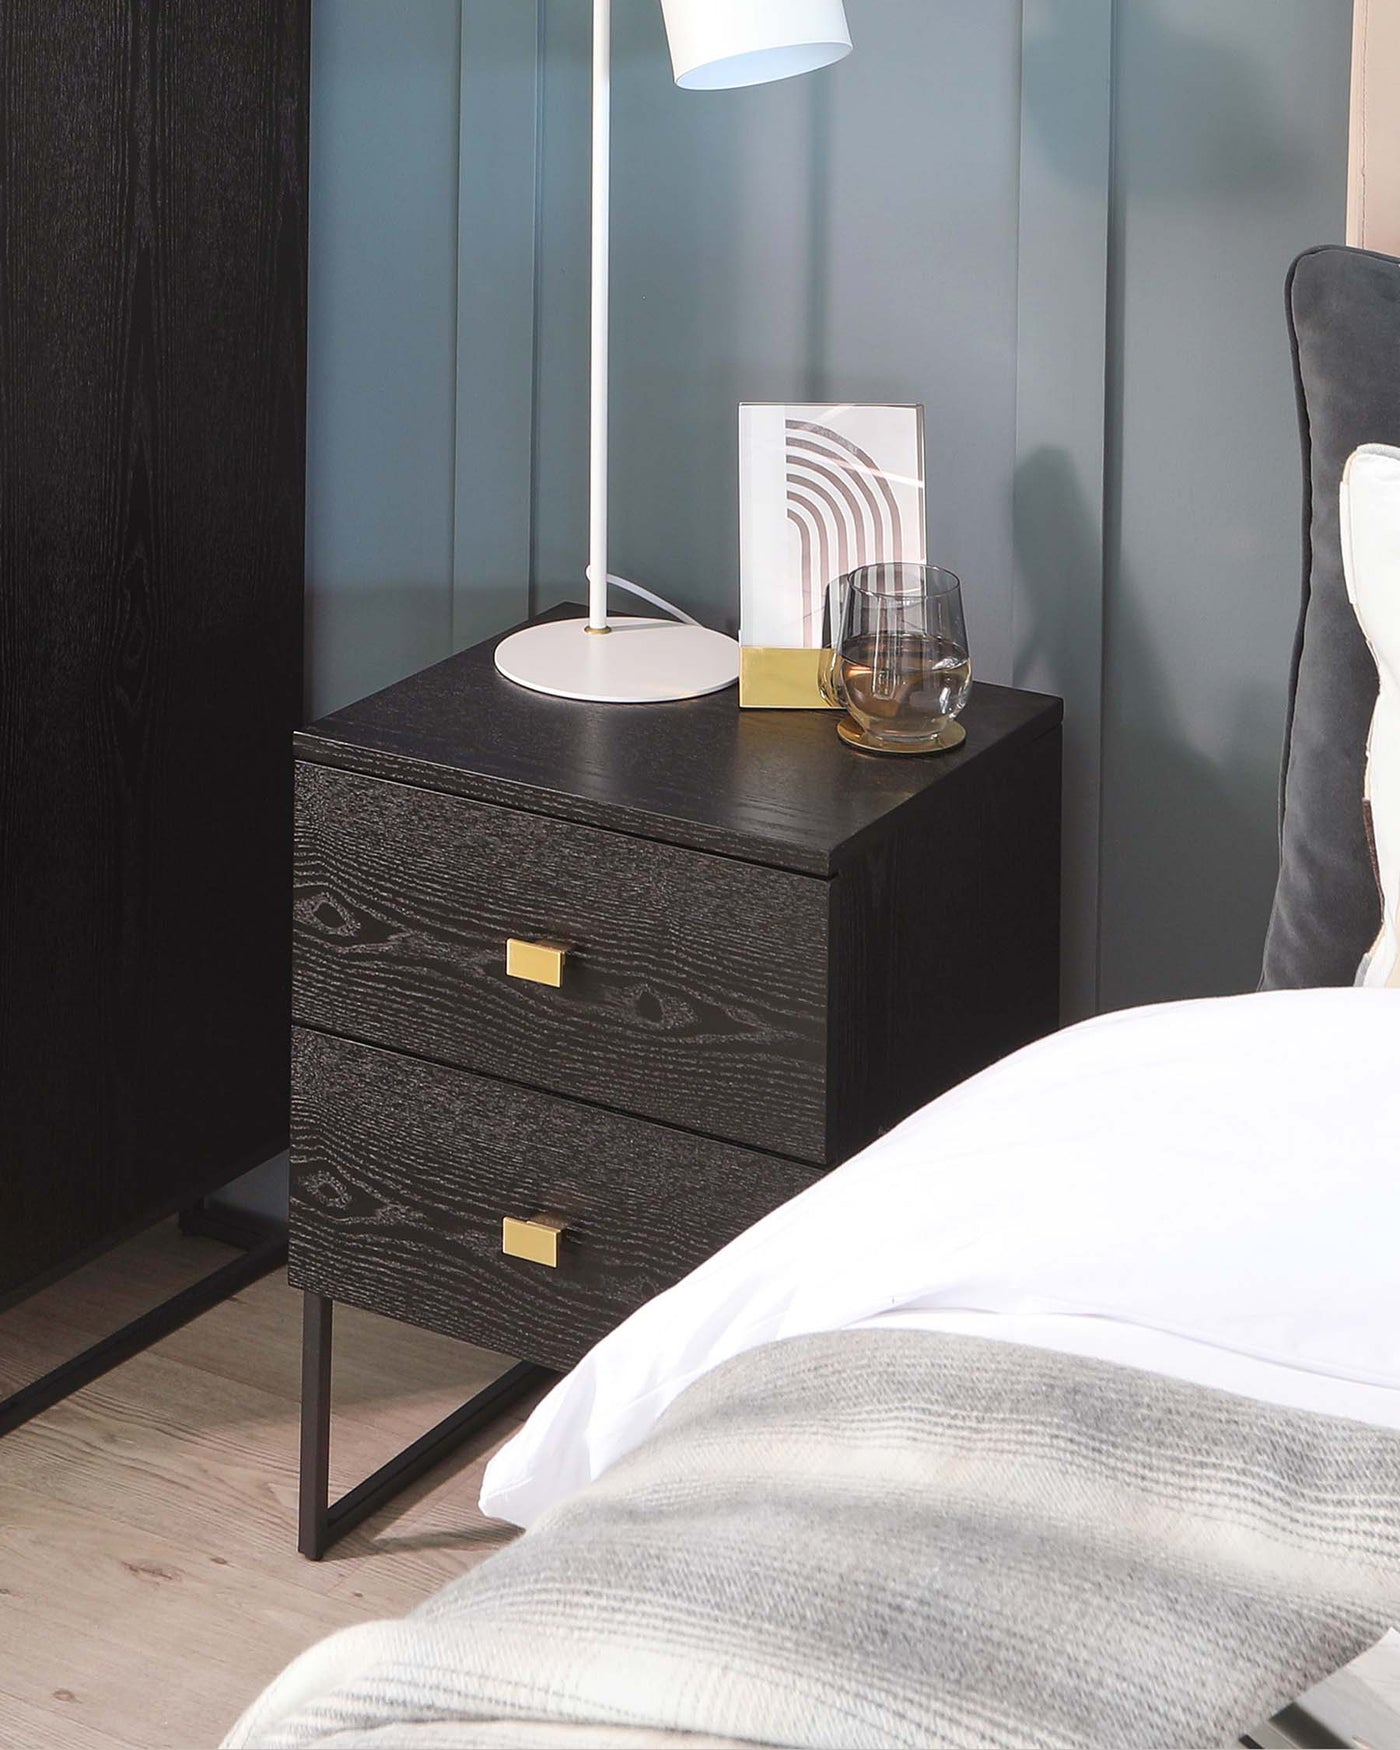 Modern black wood-grain bedside table with two drawers featuring sleek gold handles, positioned on metal legs against a teal wall, accompanied by a tall white floor lamp, decorative framed artwork, and a clear glass atop.